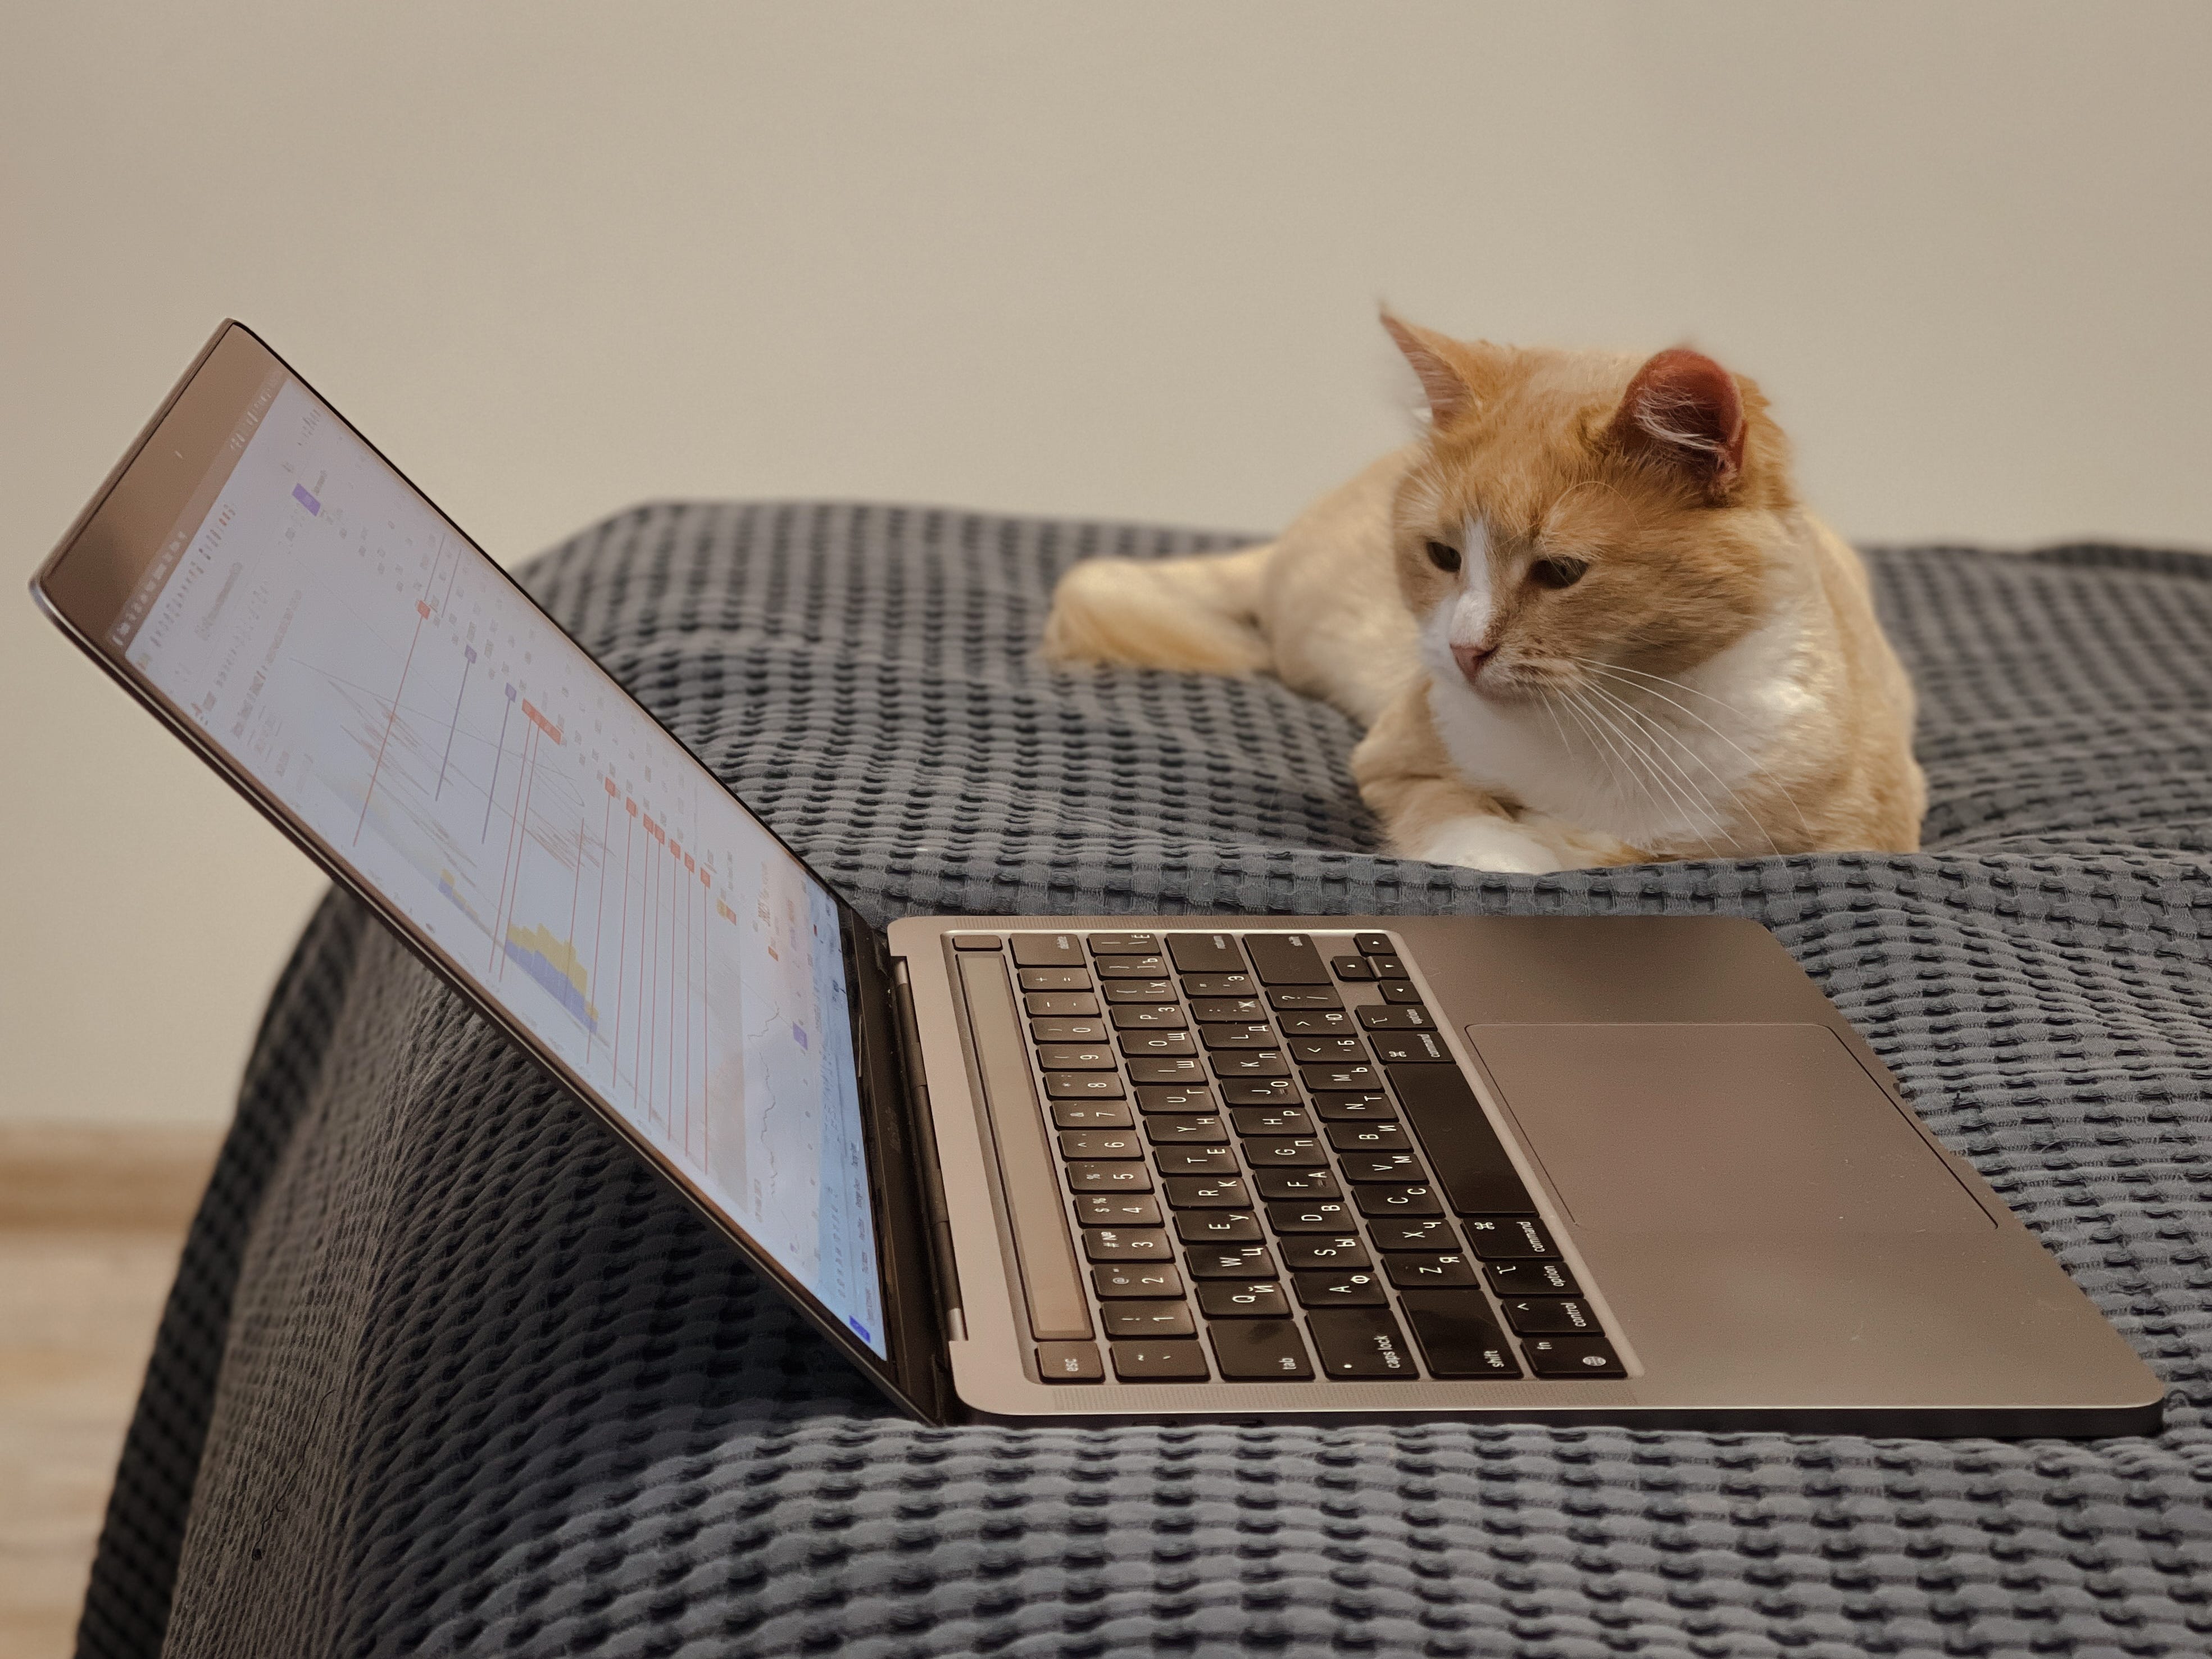 Cat with a laptop